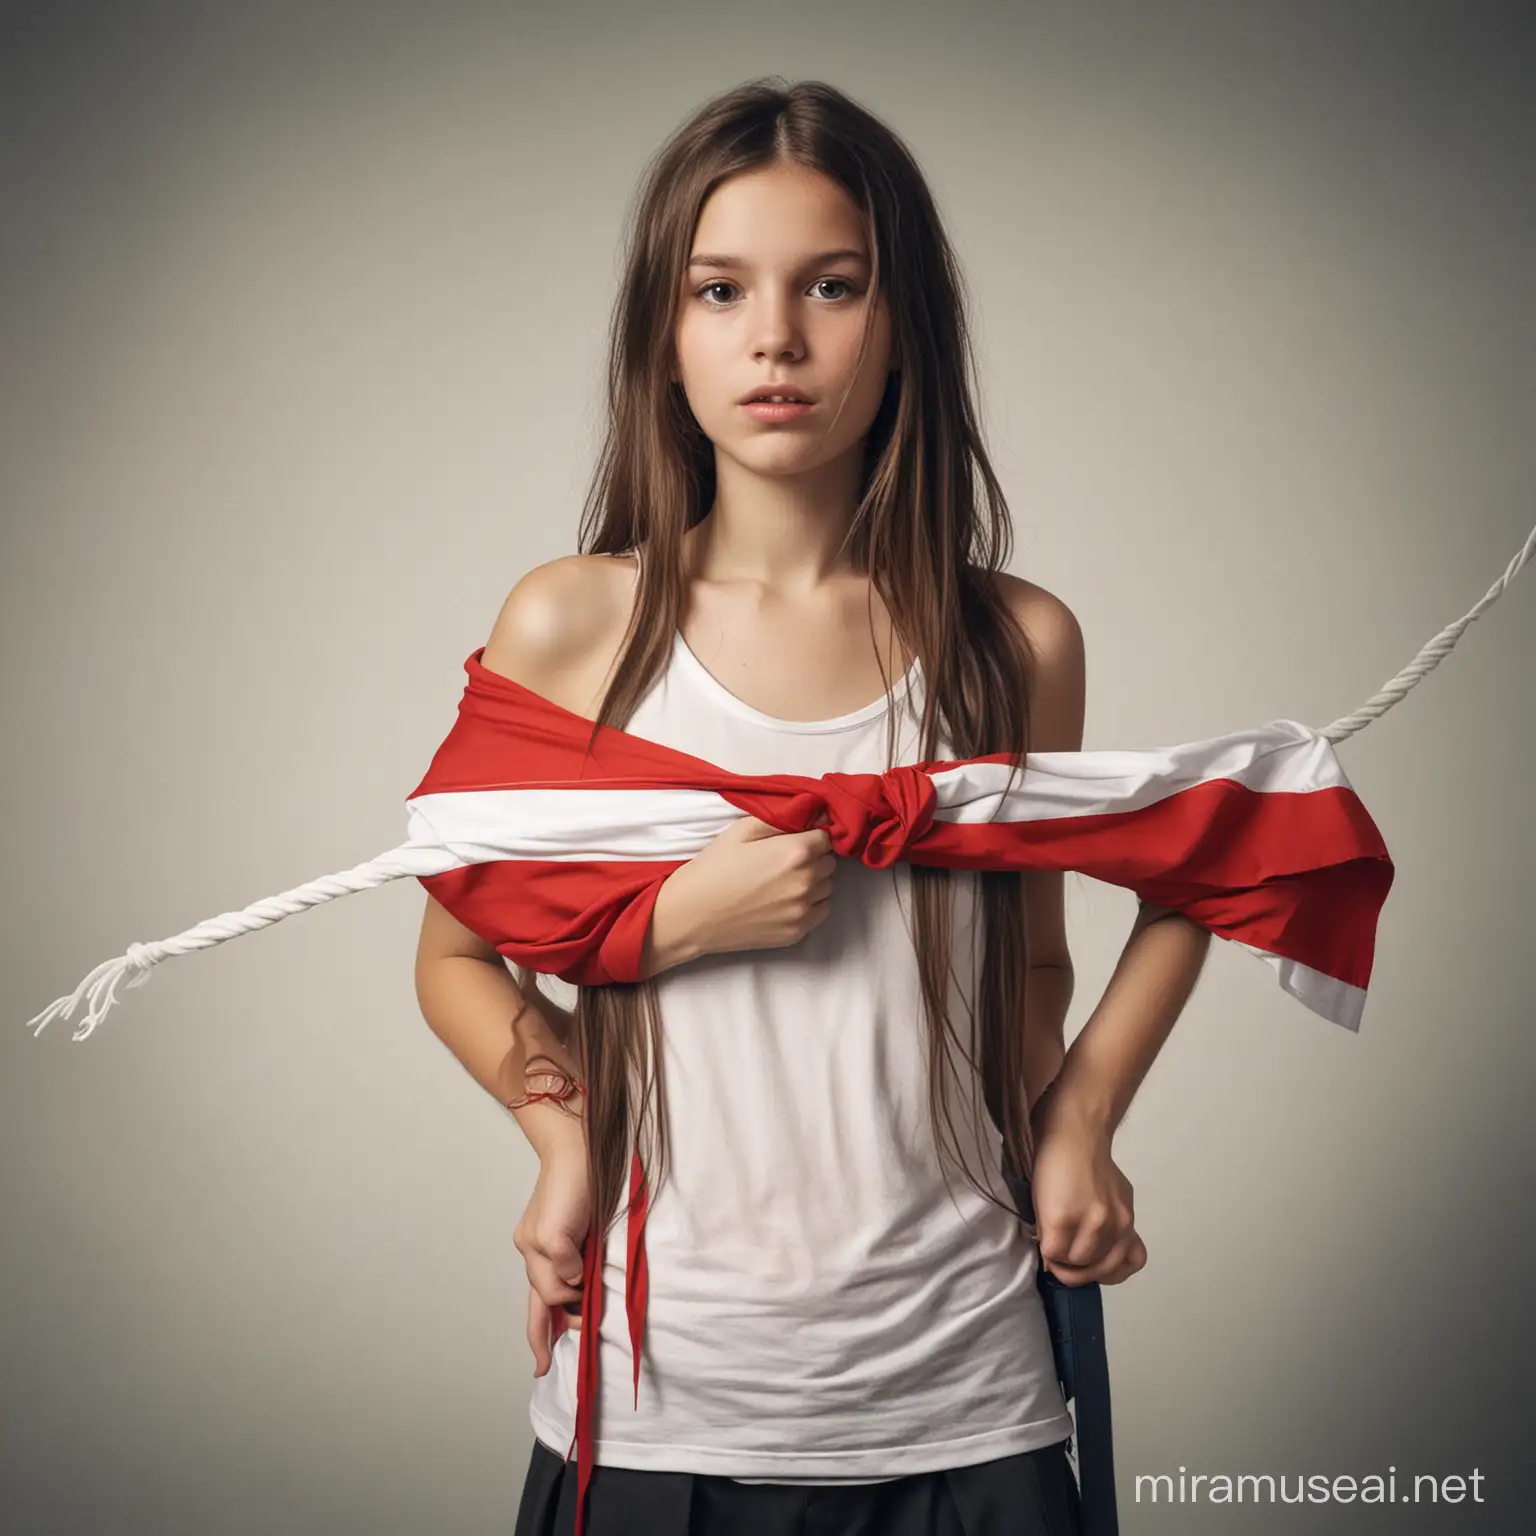 Girl tied to a danish flag
